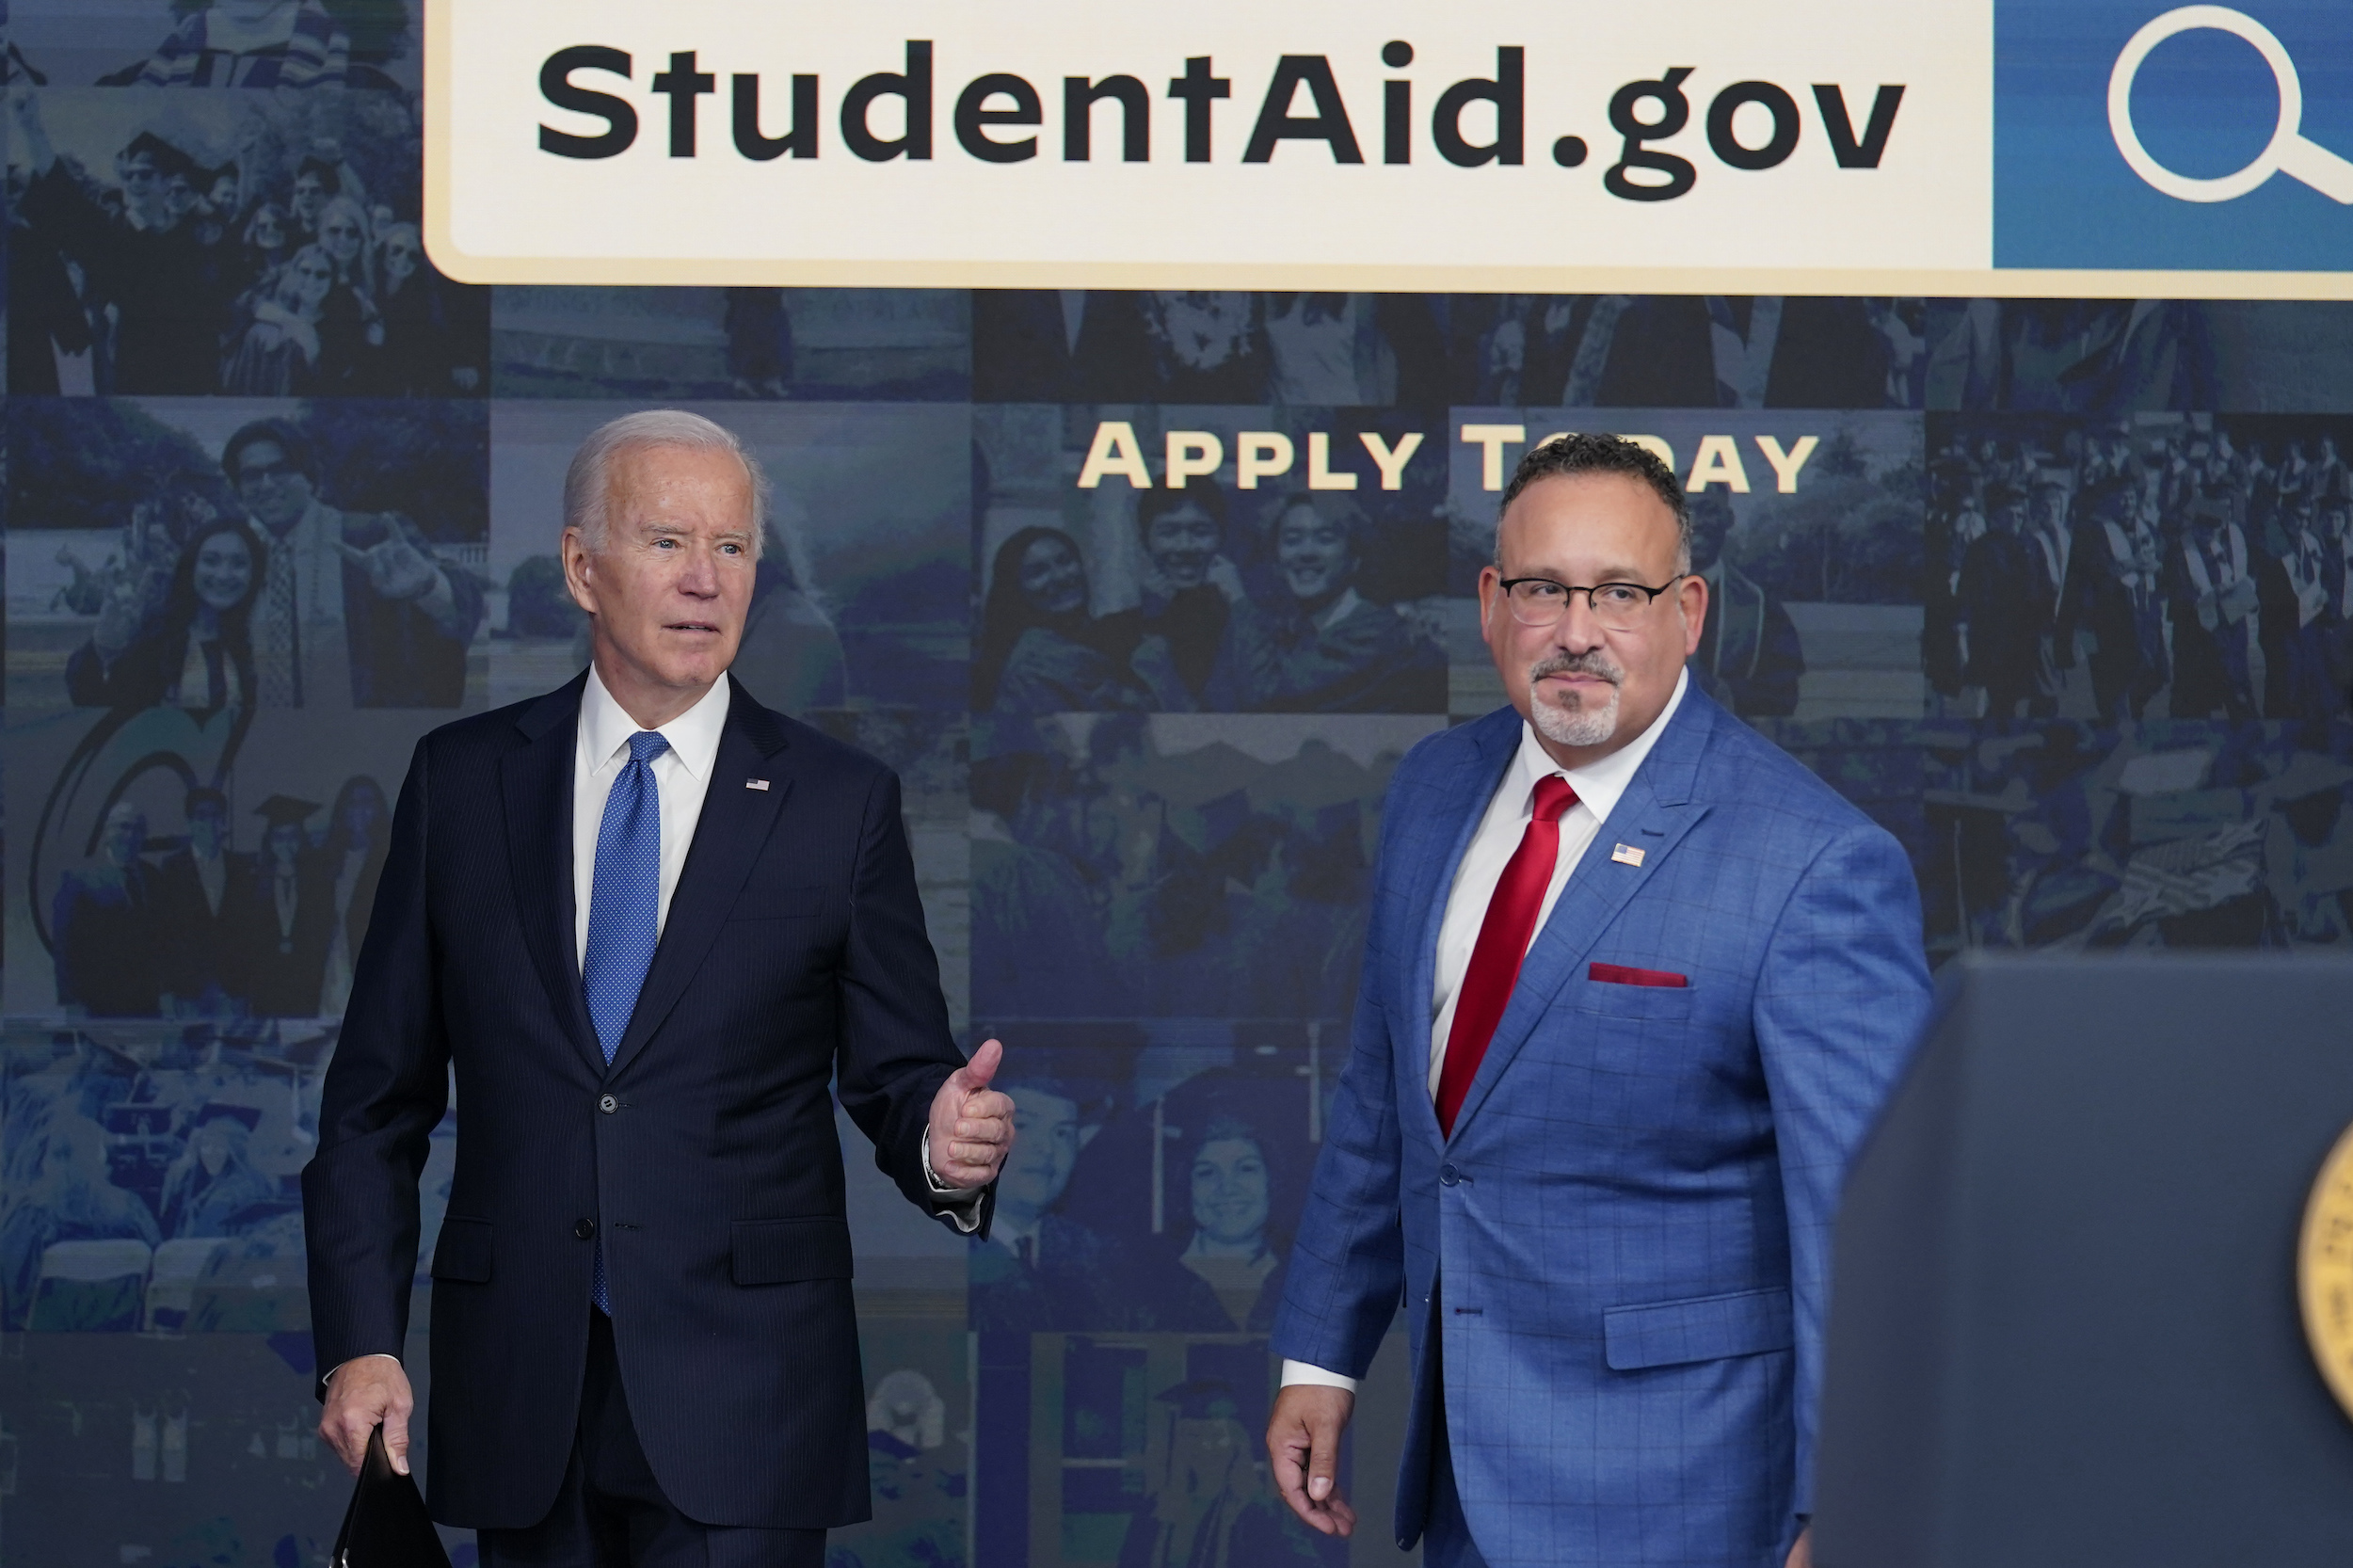 President Joe Biden answers questions with Education Secretary Miguel Cardona as they leave an event about the student debt relief portal beta test at the White House complex on October 17.